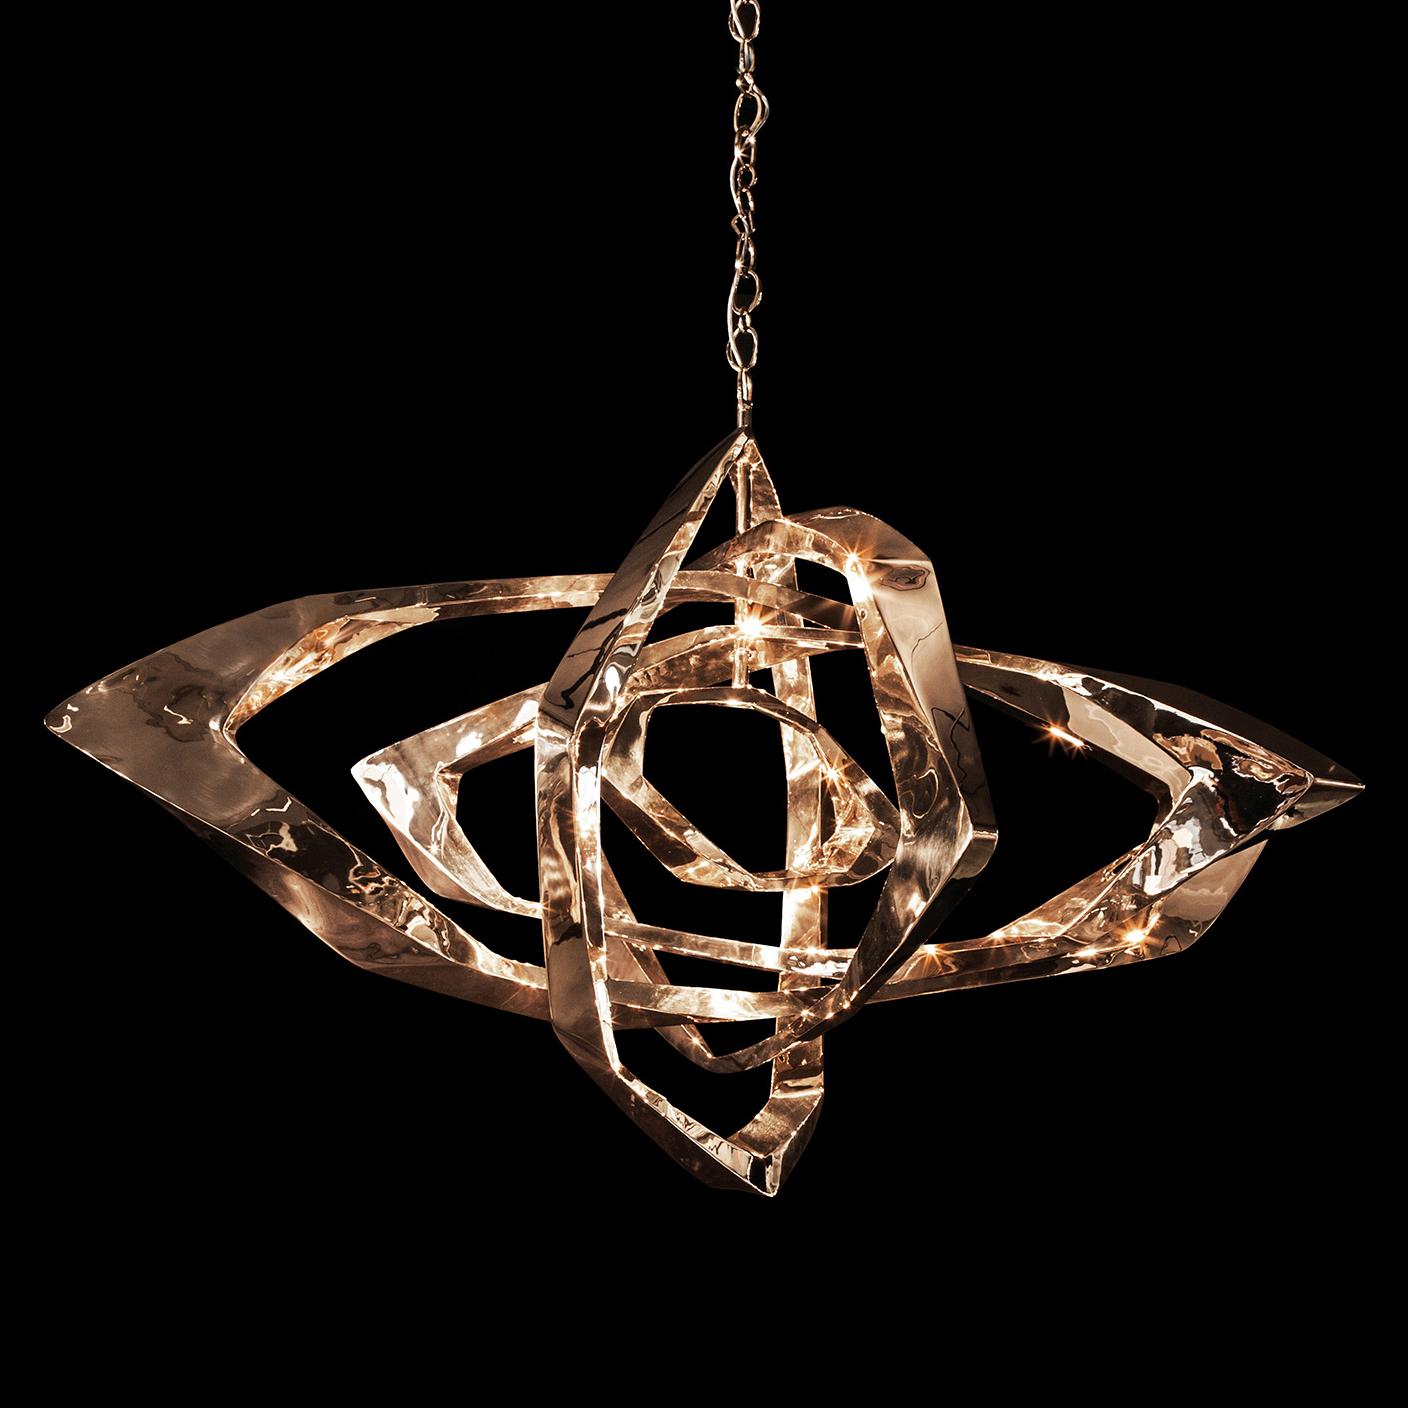 Designed by Barlas Baylar, the La Cage Chandelier has a unique contemporary style that makes a statement in any environment.  The La Cage is created by LED bulbs embedded into the Bronze frame.  The resulting light creates dynamic visual effects